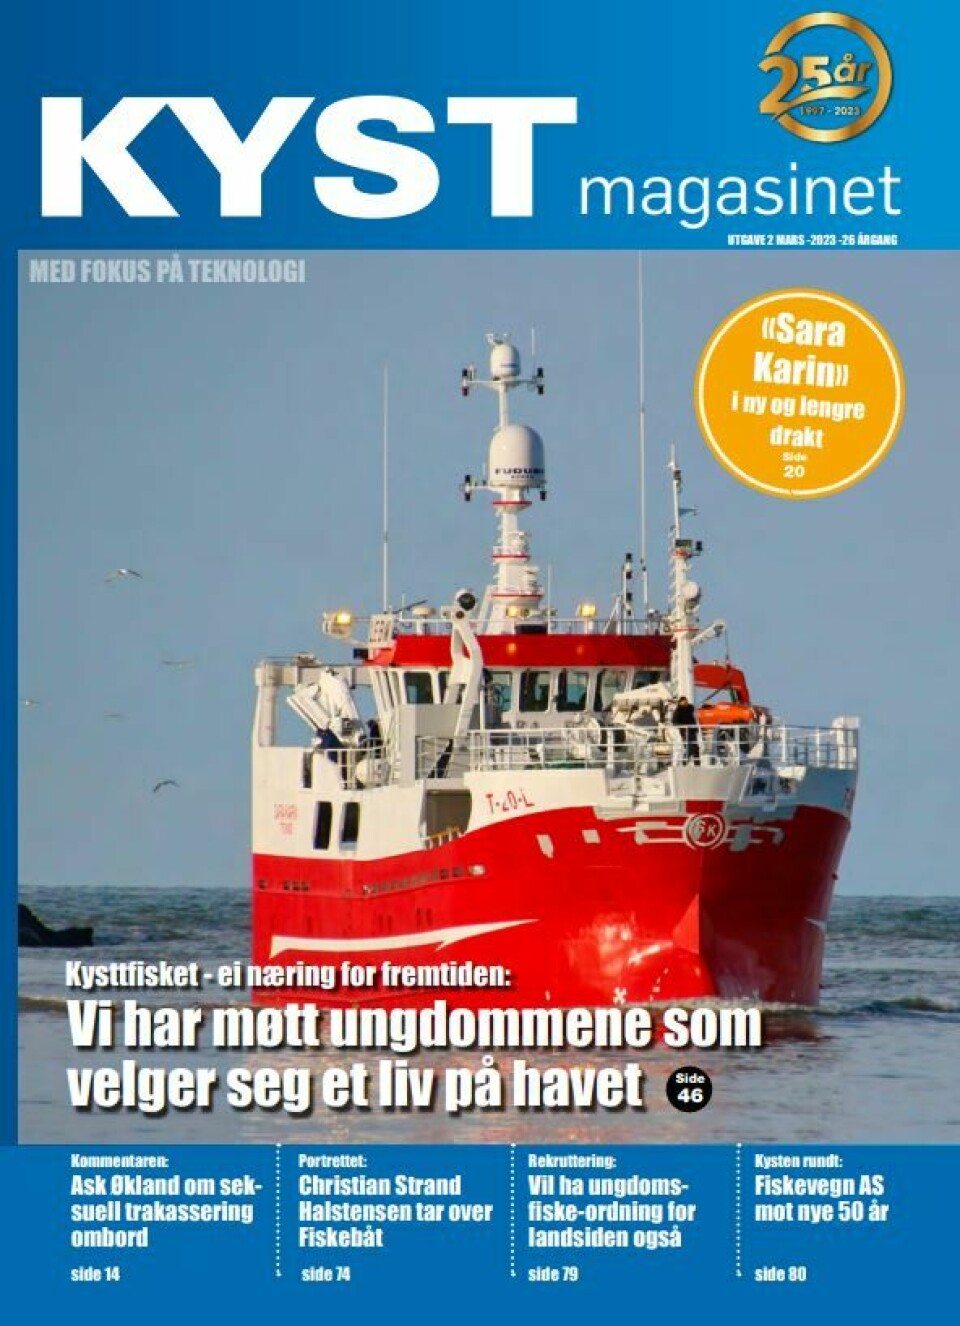 Km 2 cover page